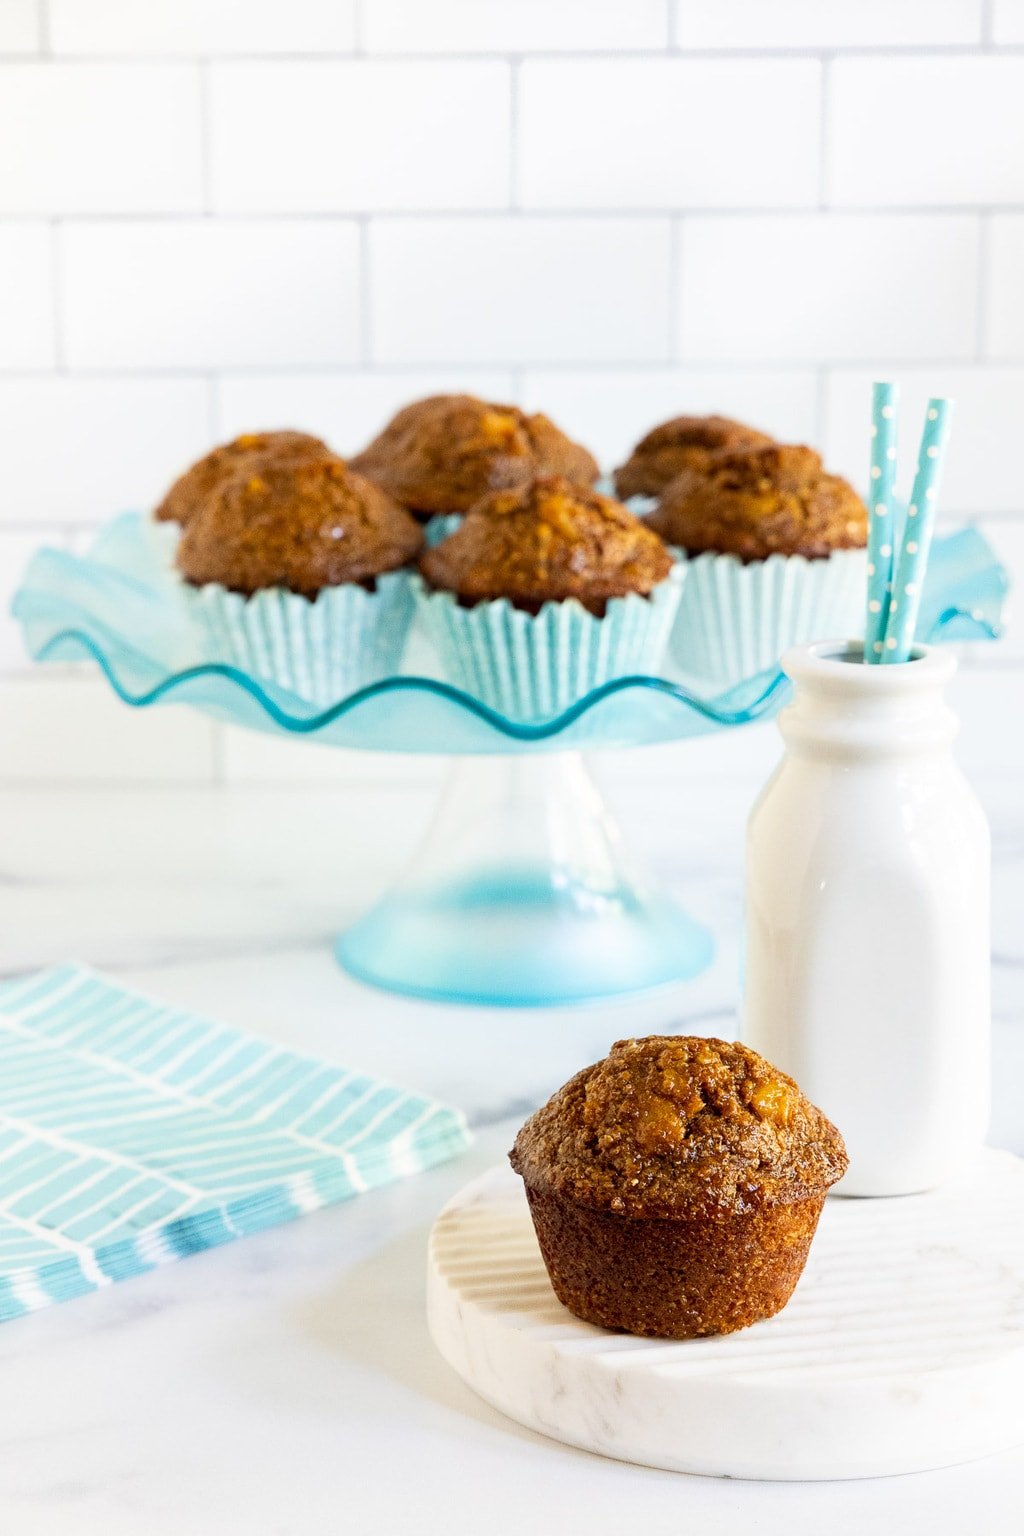 Vertical photo of a batch of Honey-Glazed Pineapple Coconut Bran Muffins on a turquoise glass pedestal platter.